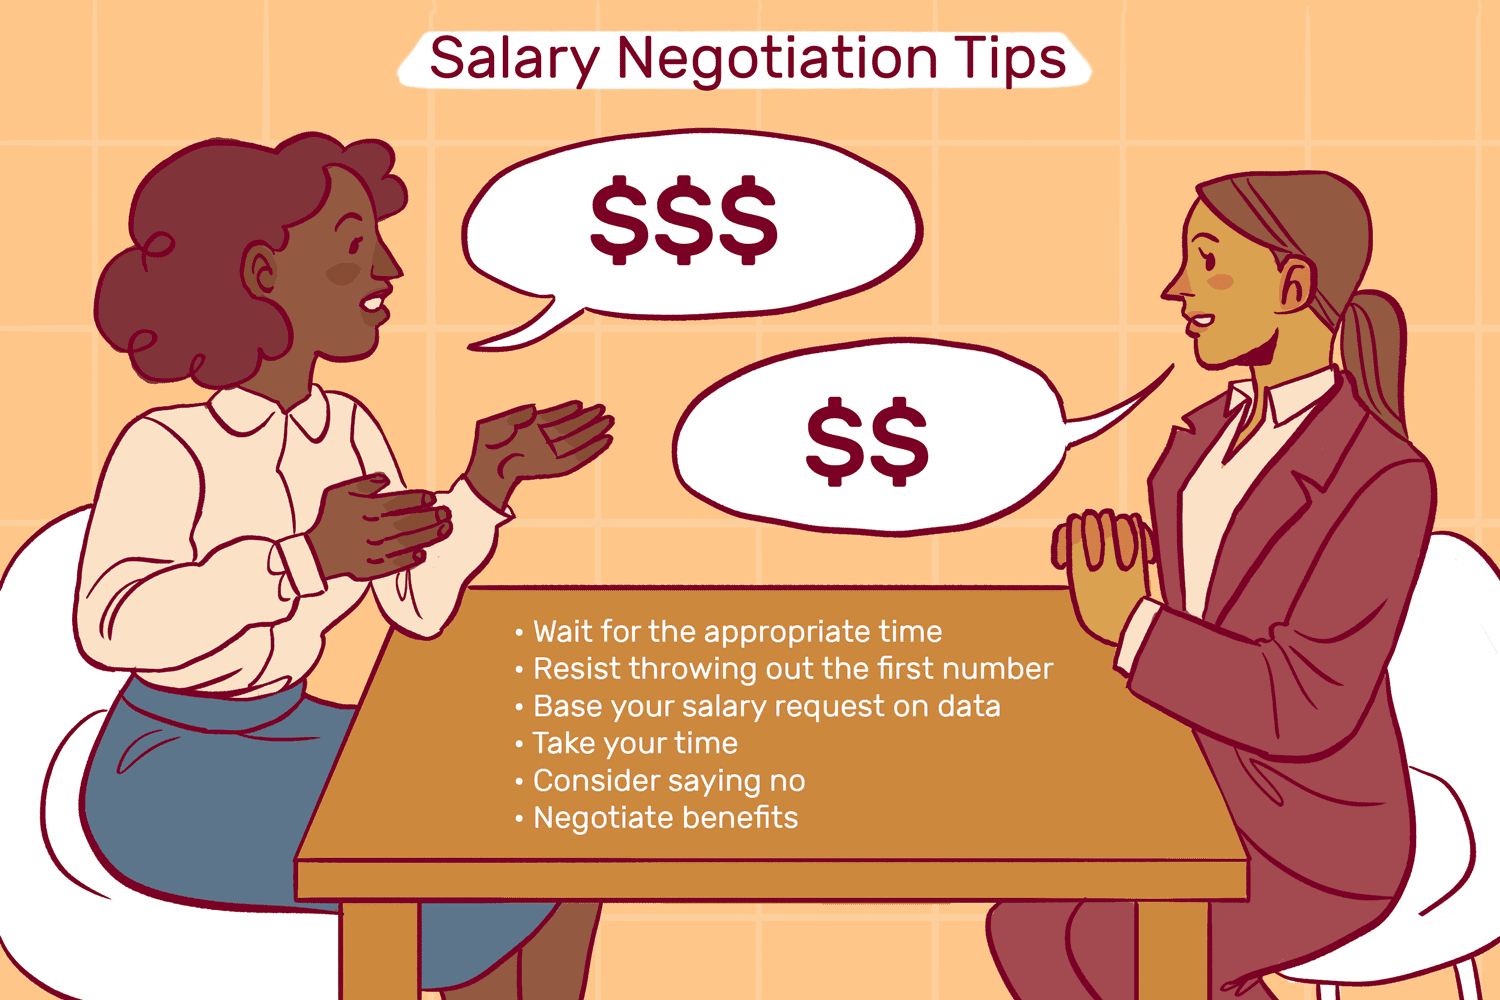 Tips on How to Negotiate Salary